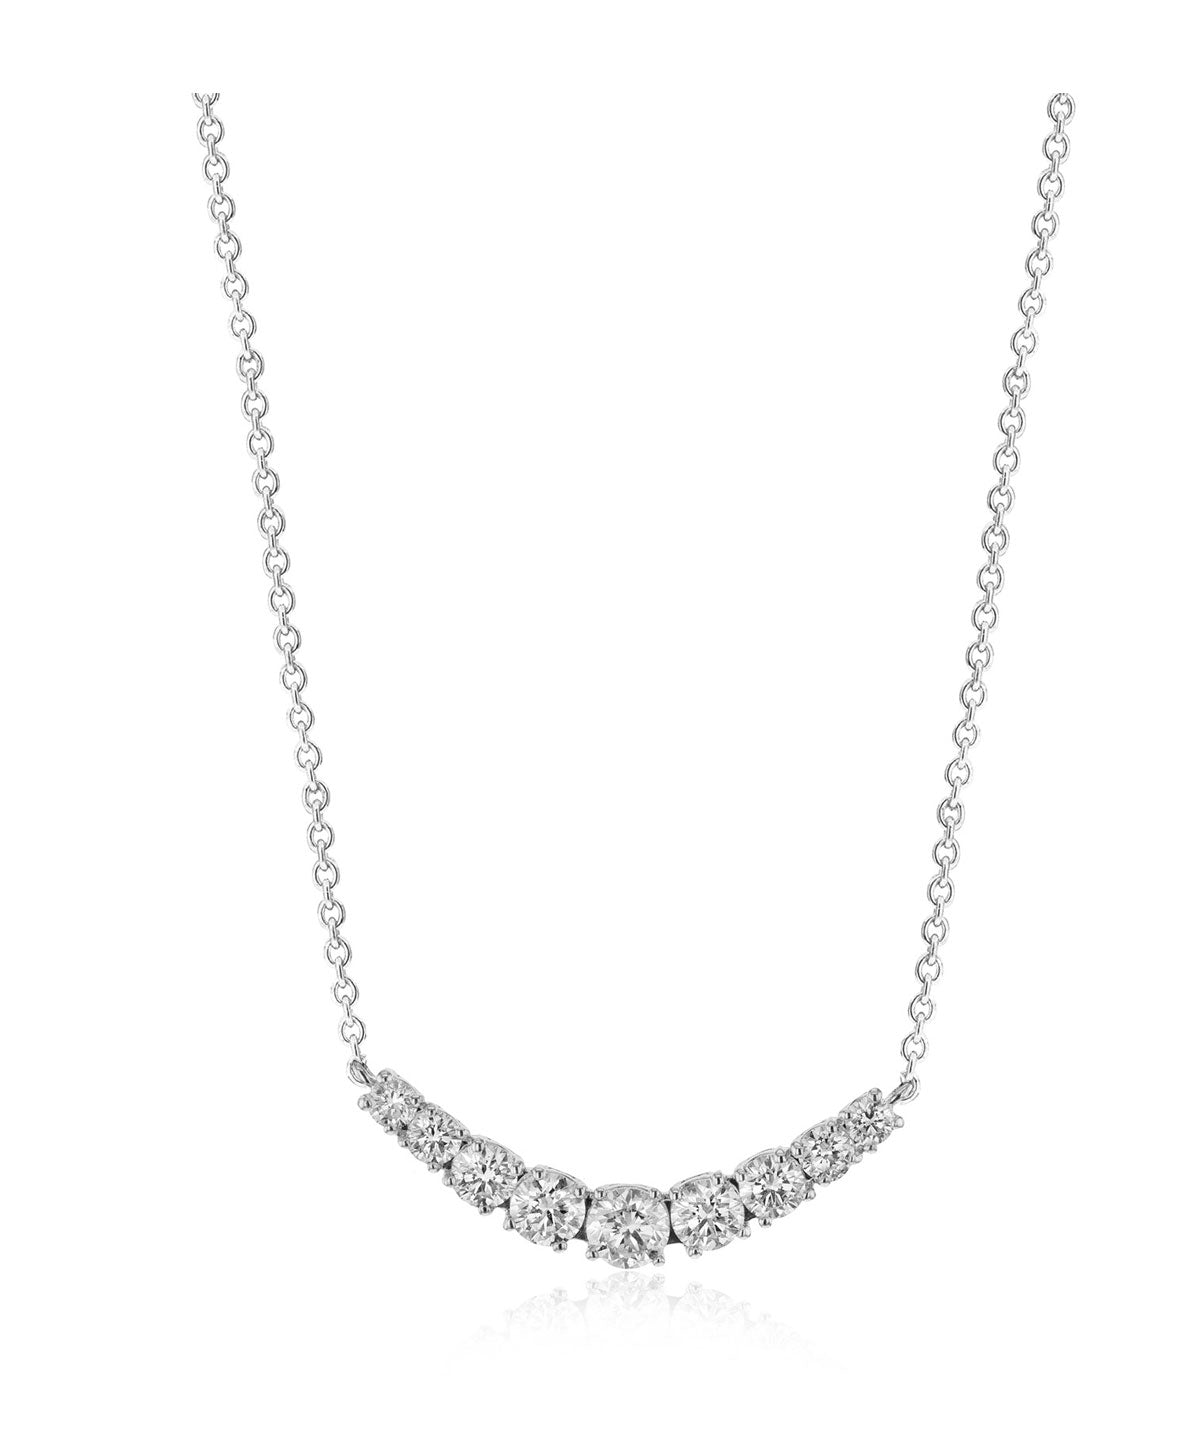 Zeghani 14K WHITE GOLD CURVED DIAMOND PENDANT ON 16" CHAIN